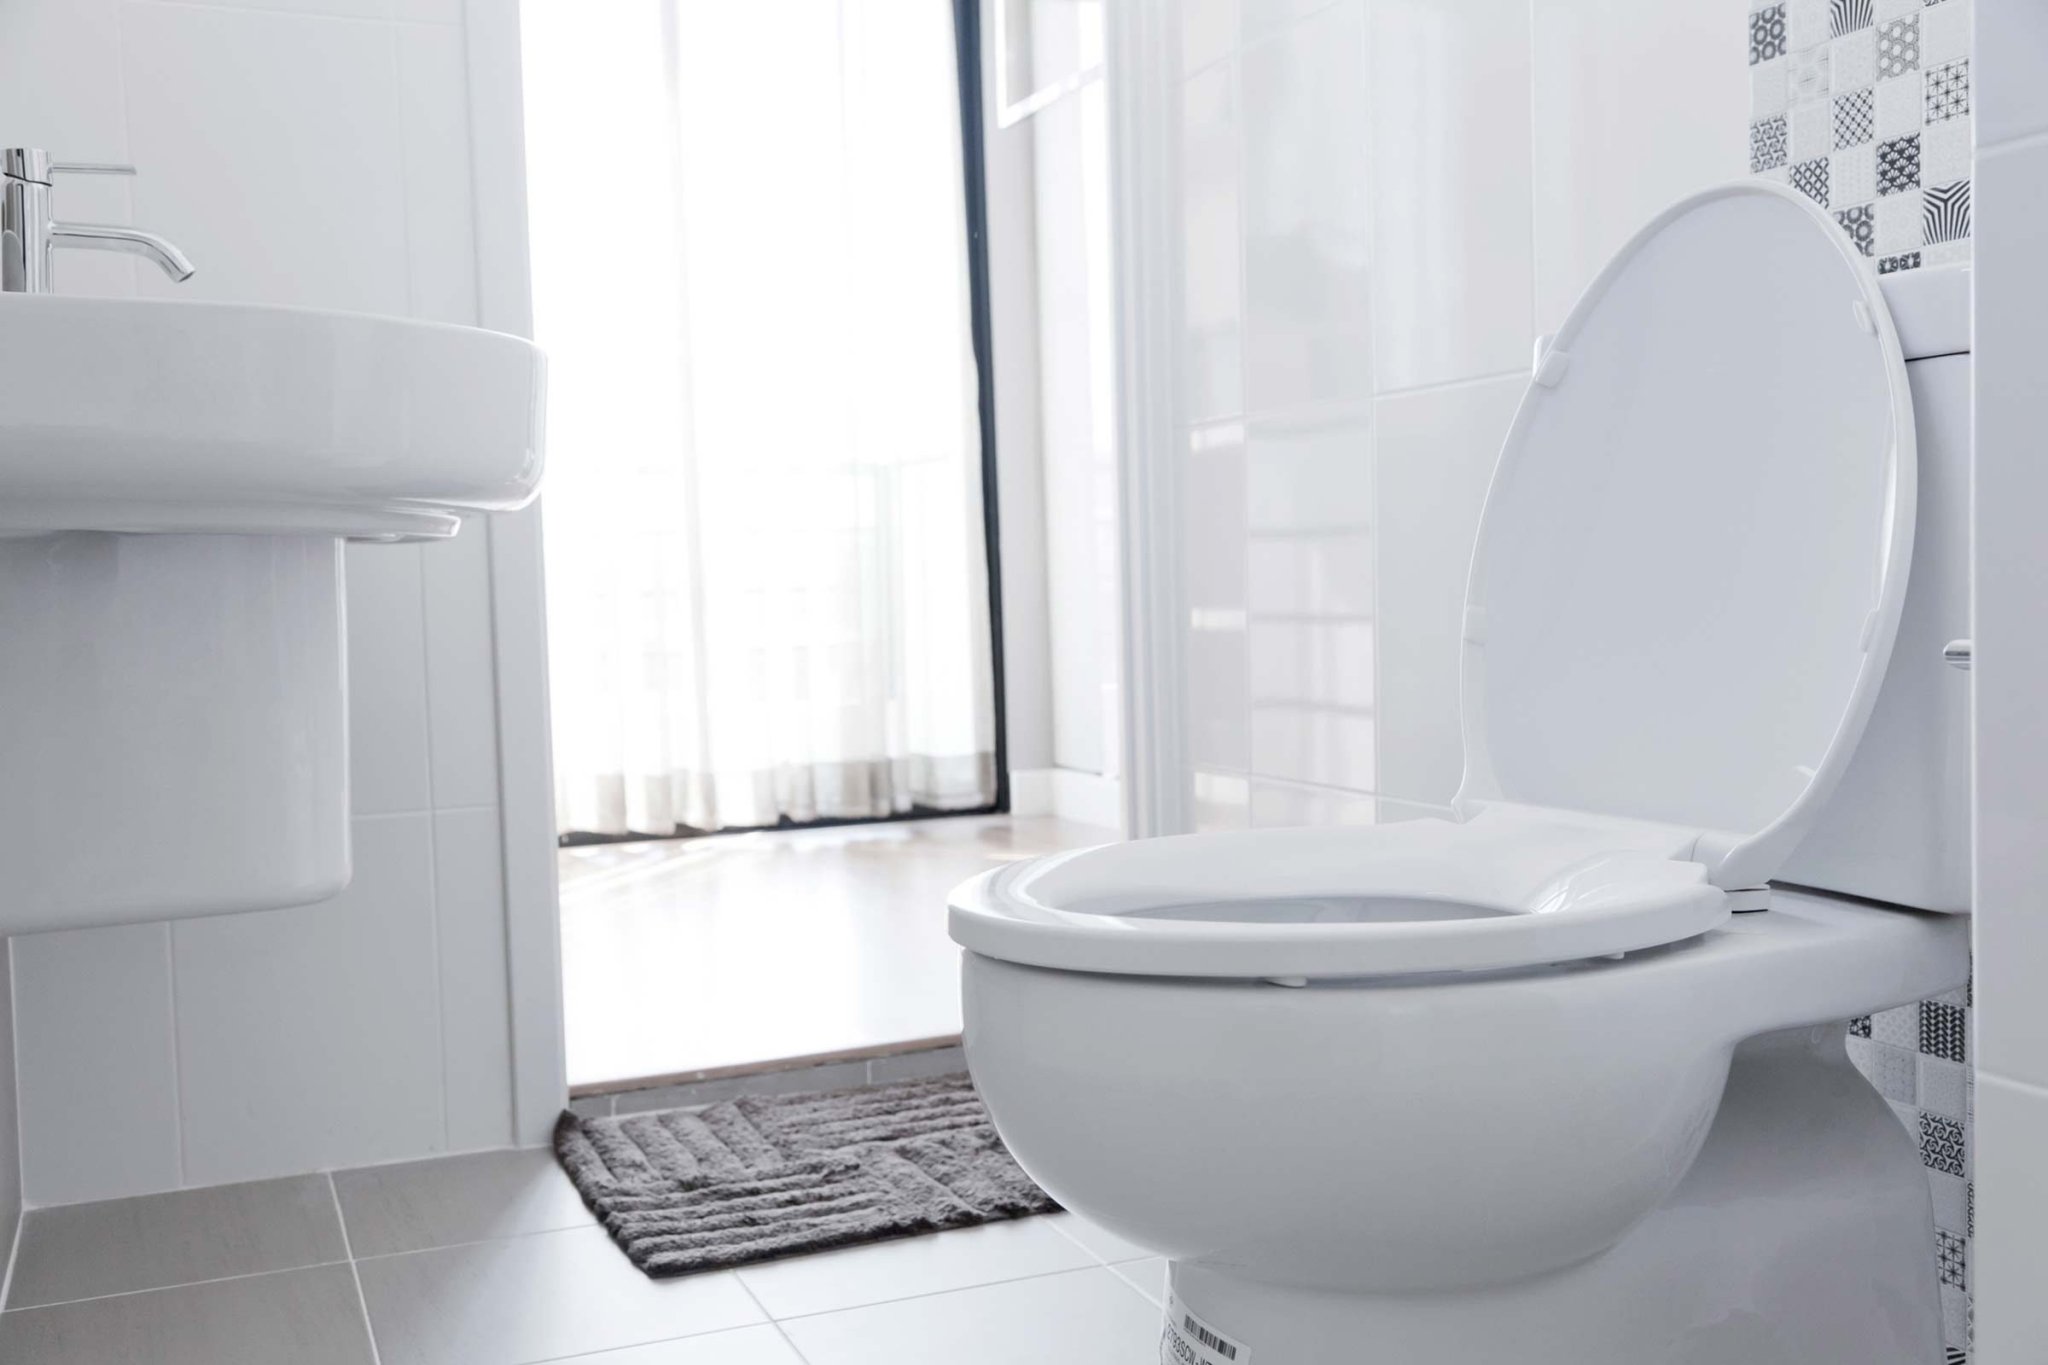 Holding in Poop: Is It Really Bad for You?